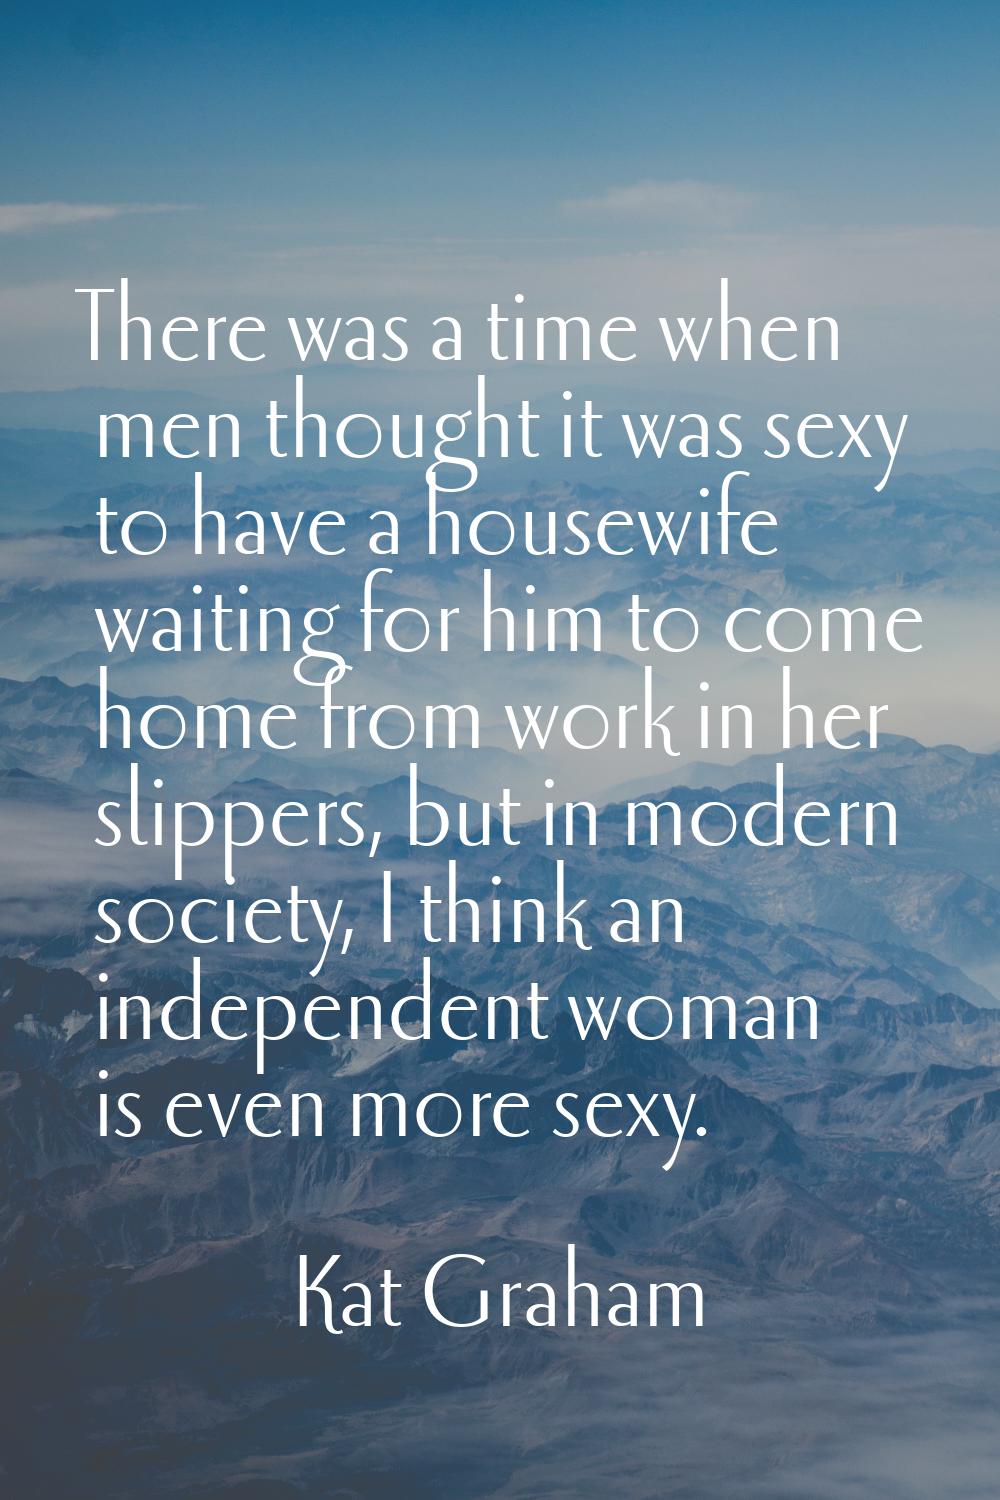 There was a time when men thought it was sexy to have a housewife waiting for him to come home from